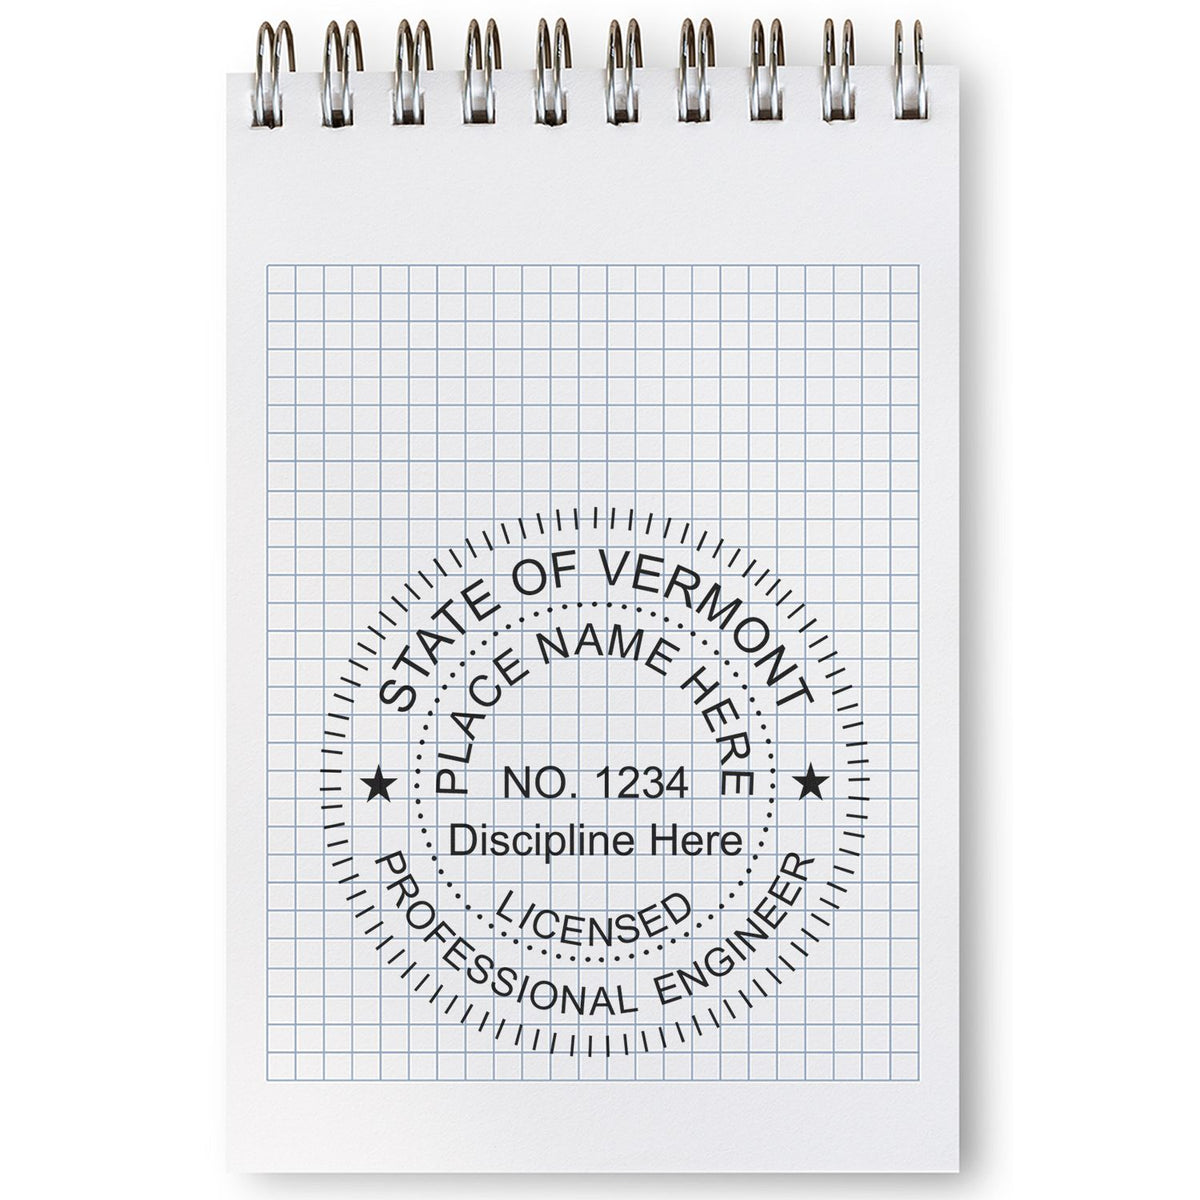 A stamped impression of the Premium MaxLight Pre-Inked Vermont Engineering Stamp in this stylish lifestyle photo, setting the tone for a unique and personalized product.